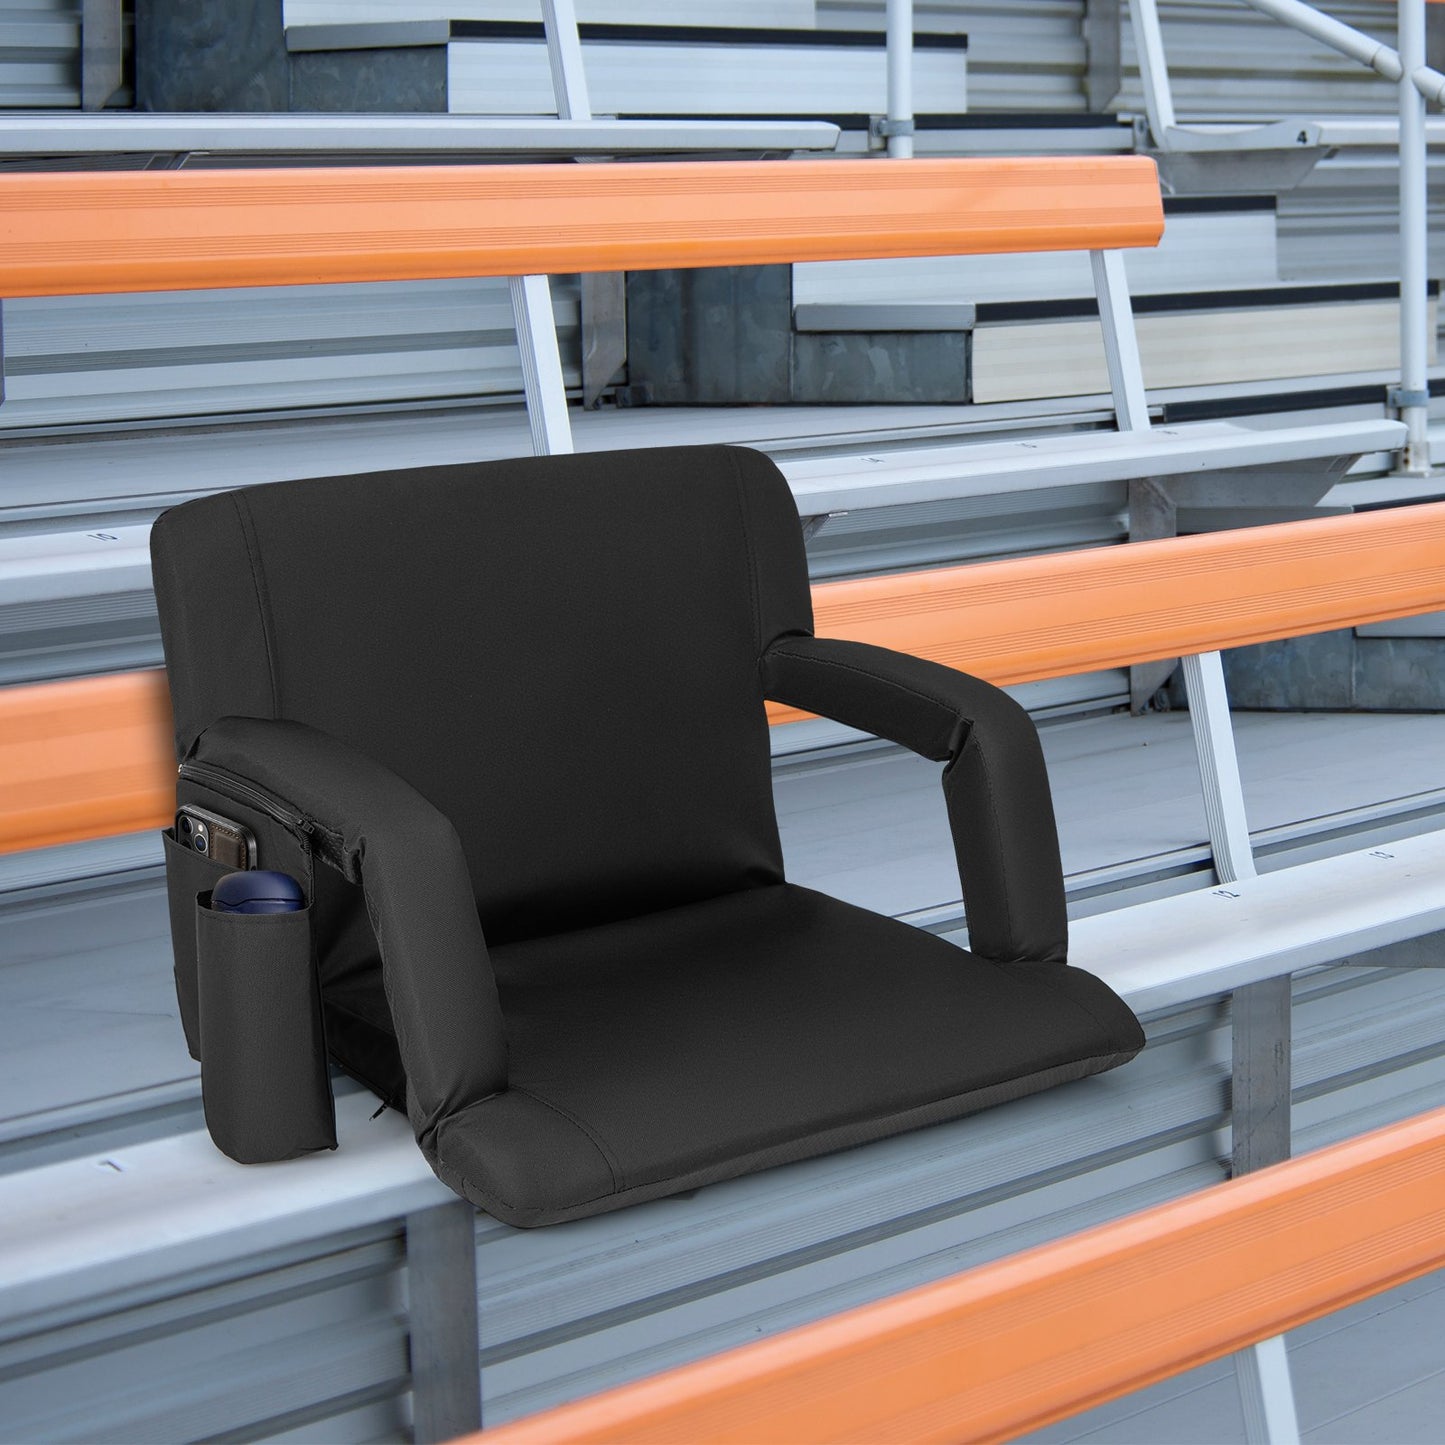 Stadium Seat for Bleachers with Back Support 6 Adjustable Positions, Black